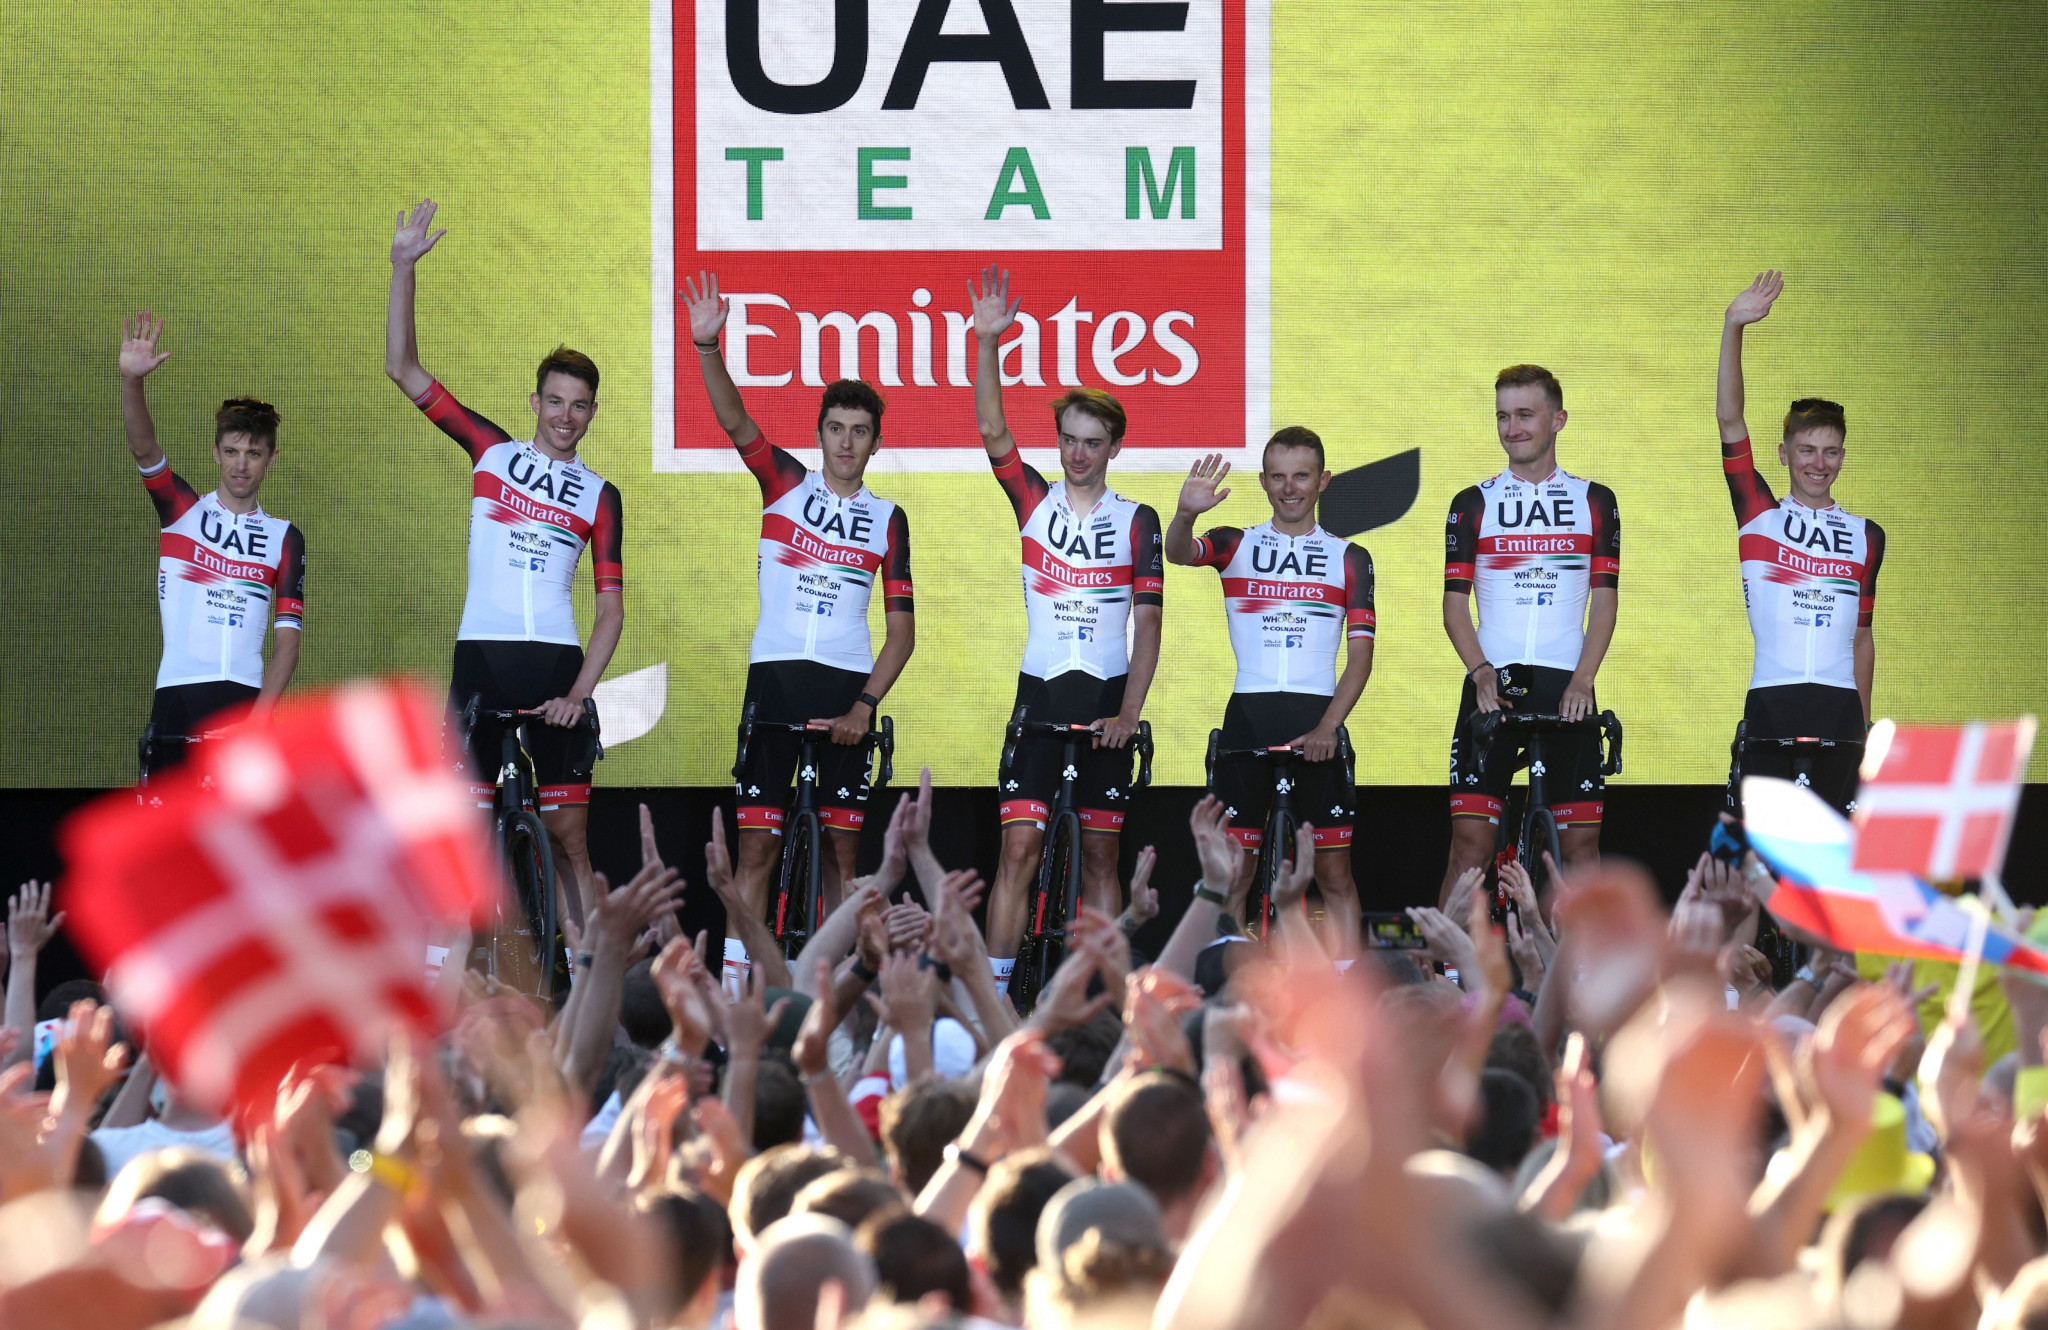 UAE Team Emirates have named a strong team including two-time Tour de France winner and reigning champion Tadej Pogačar from Slovenia ©Getty Images